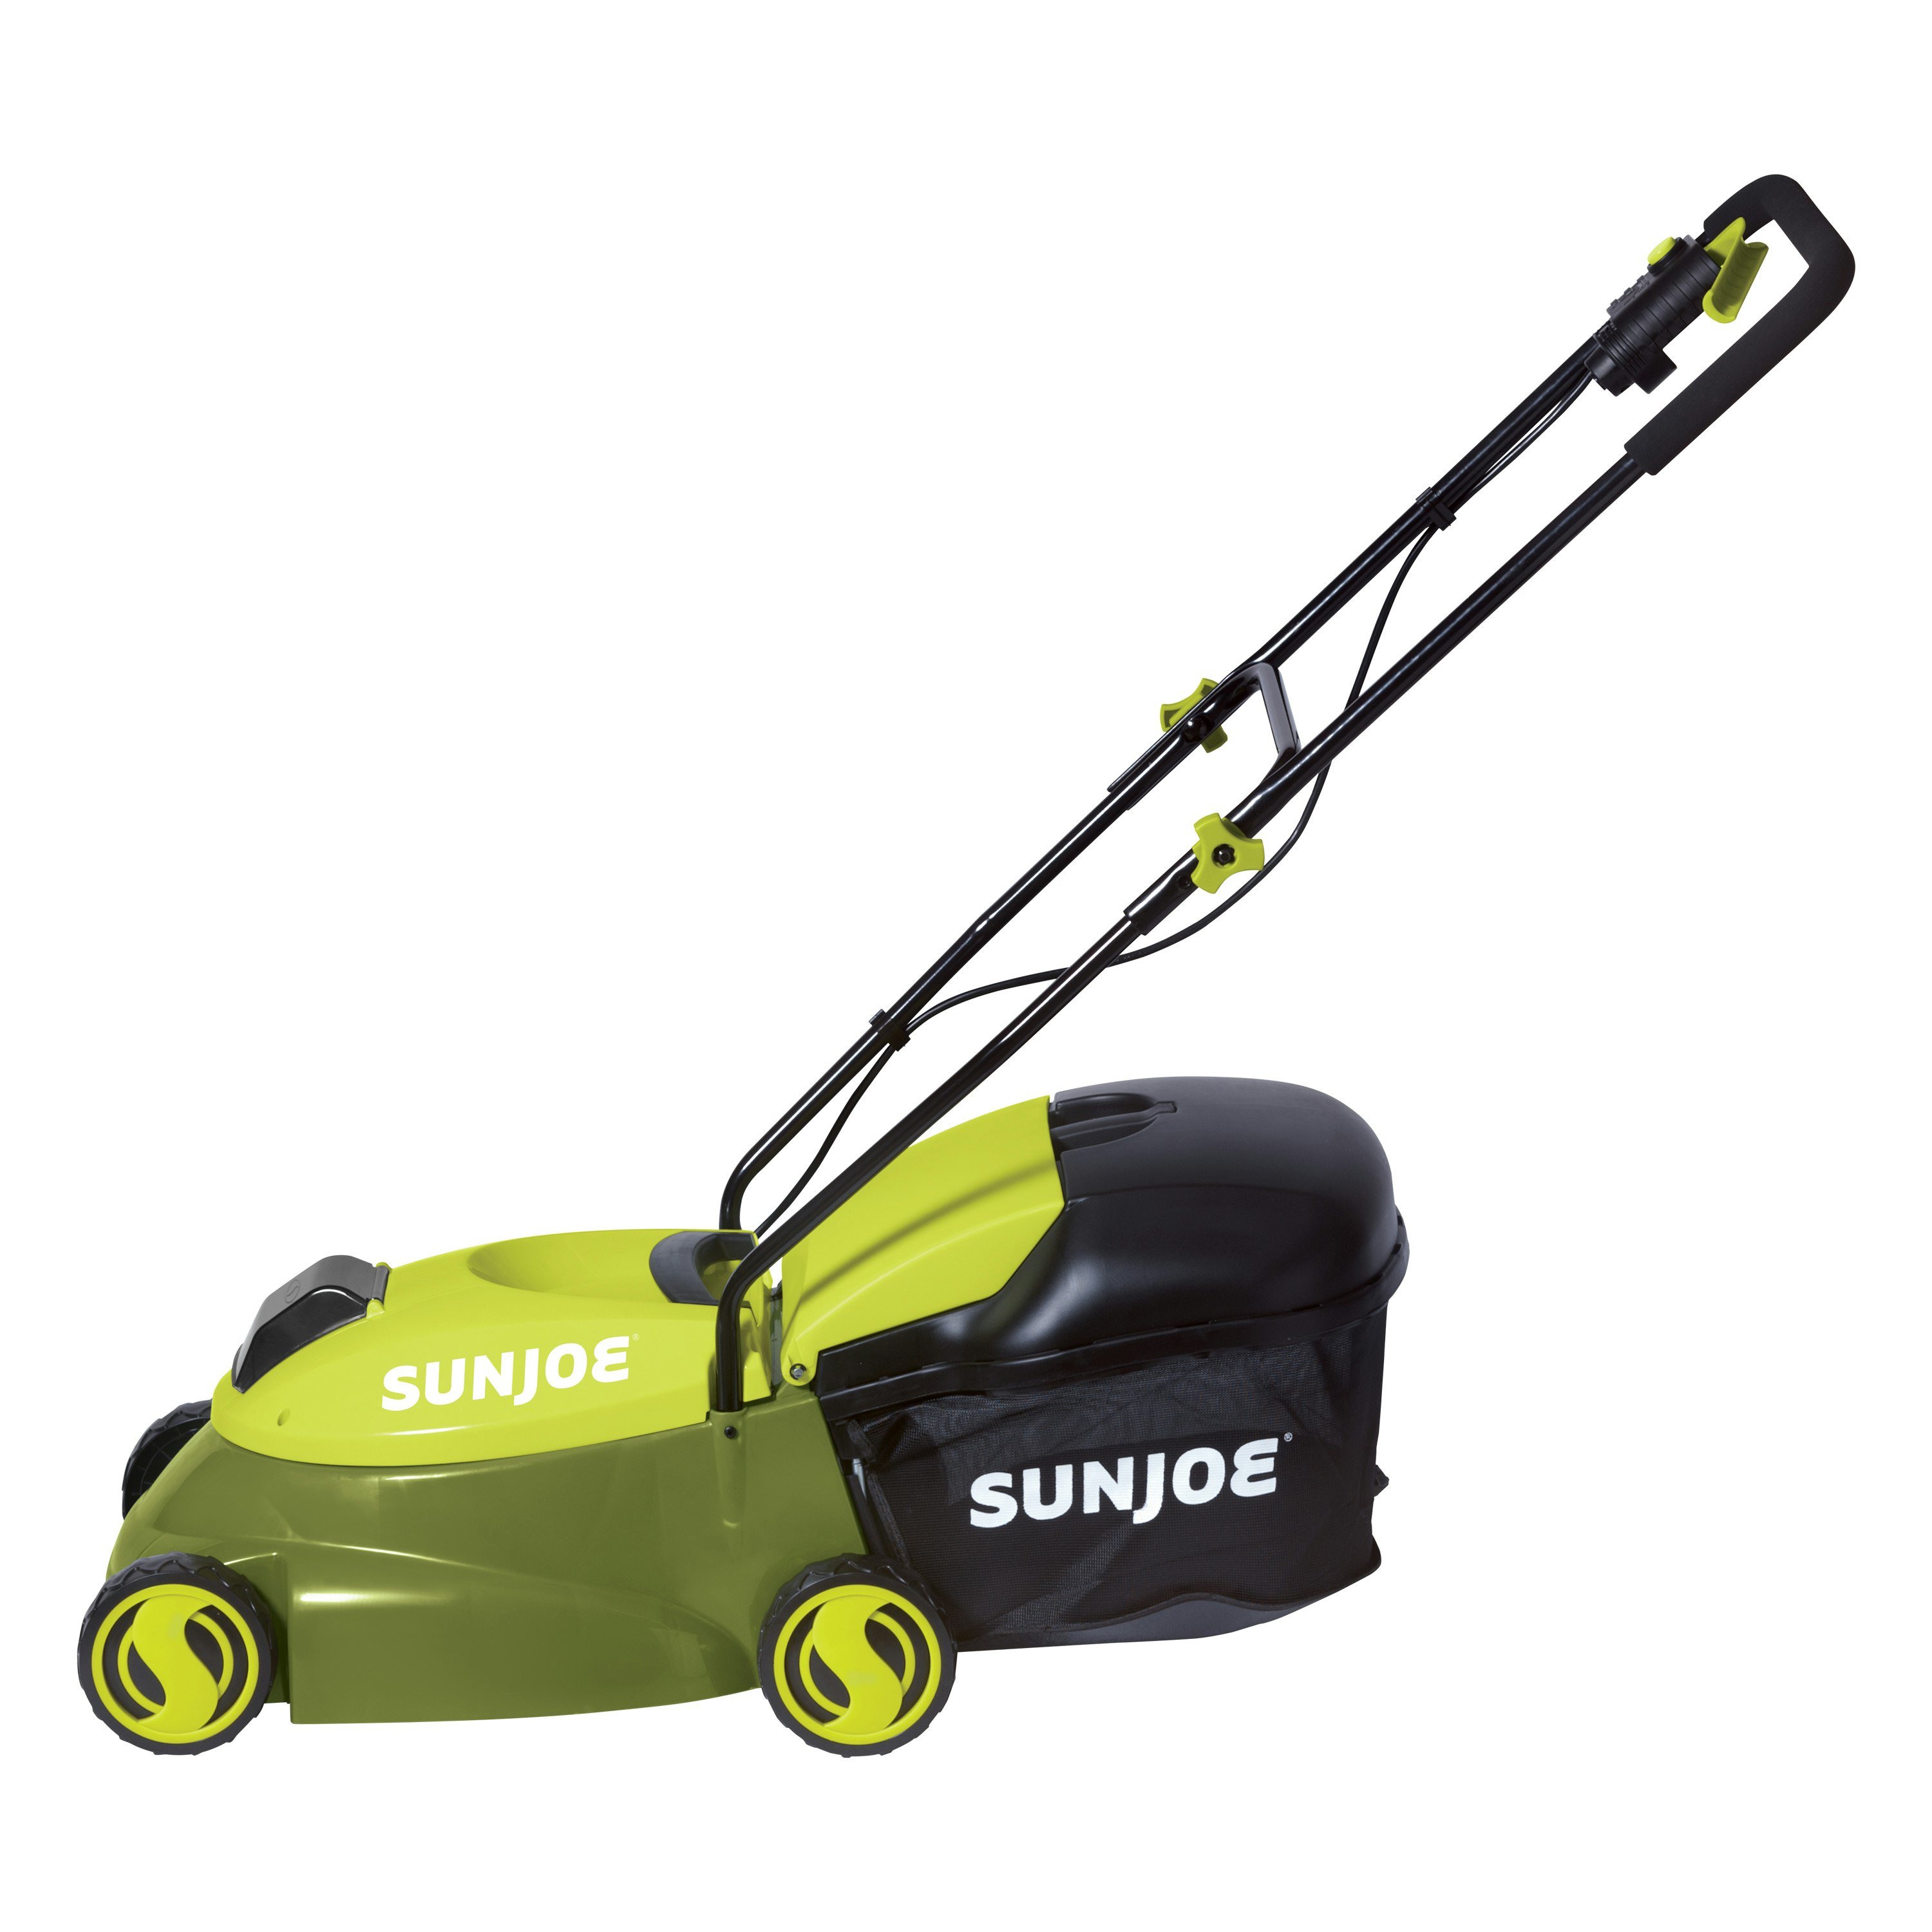 lawn mower and strimmer set